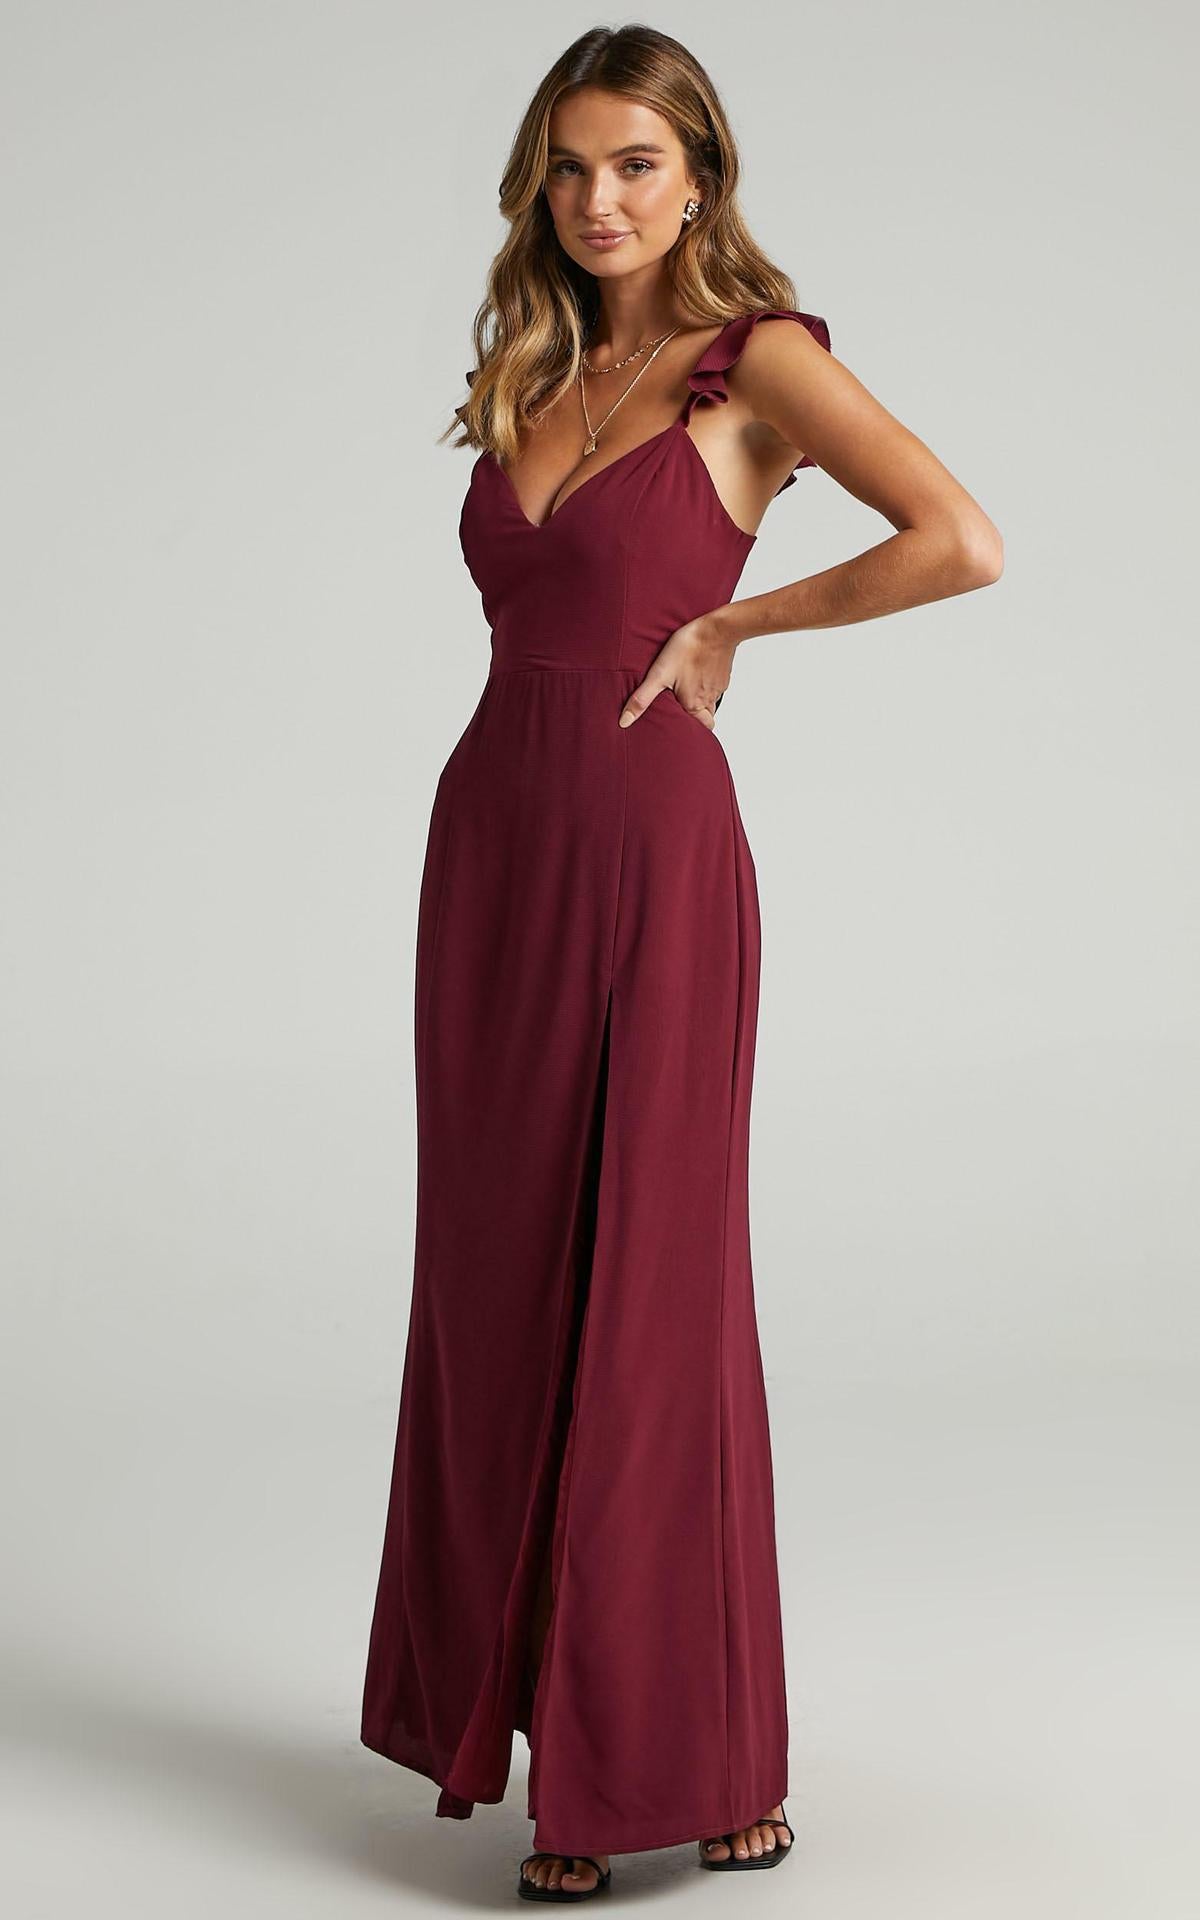 More Than This Ruffle Strap Maxi Dress - Red